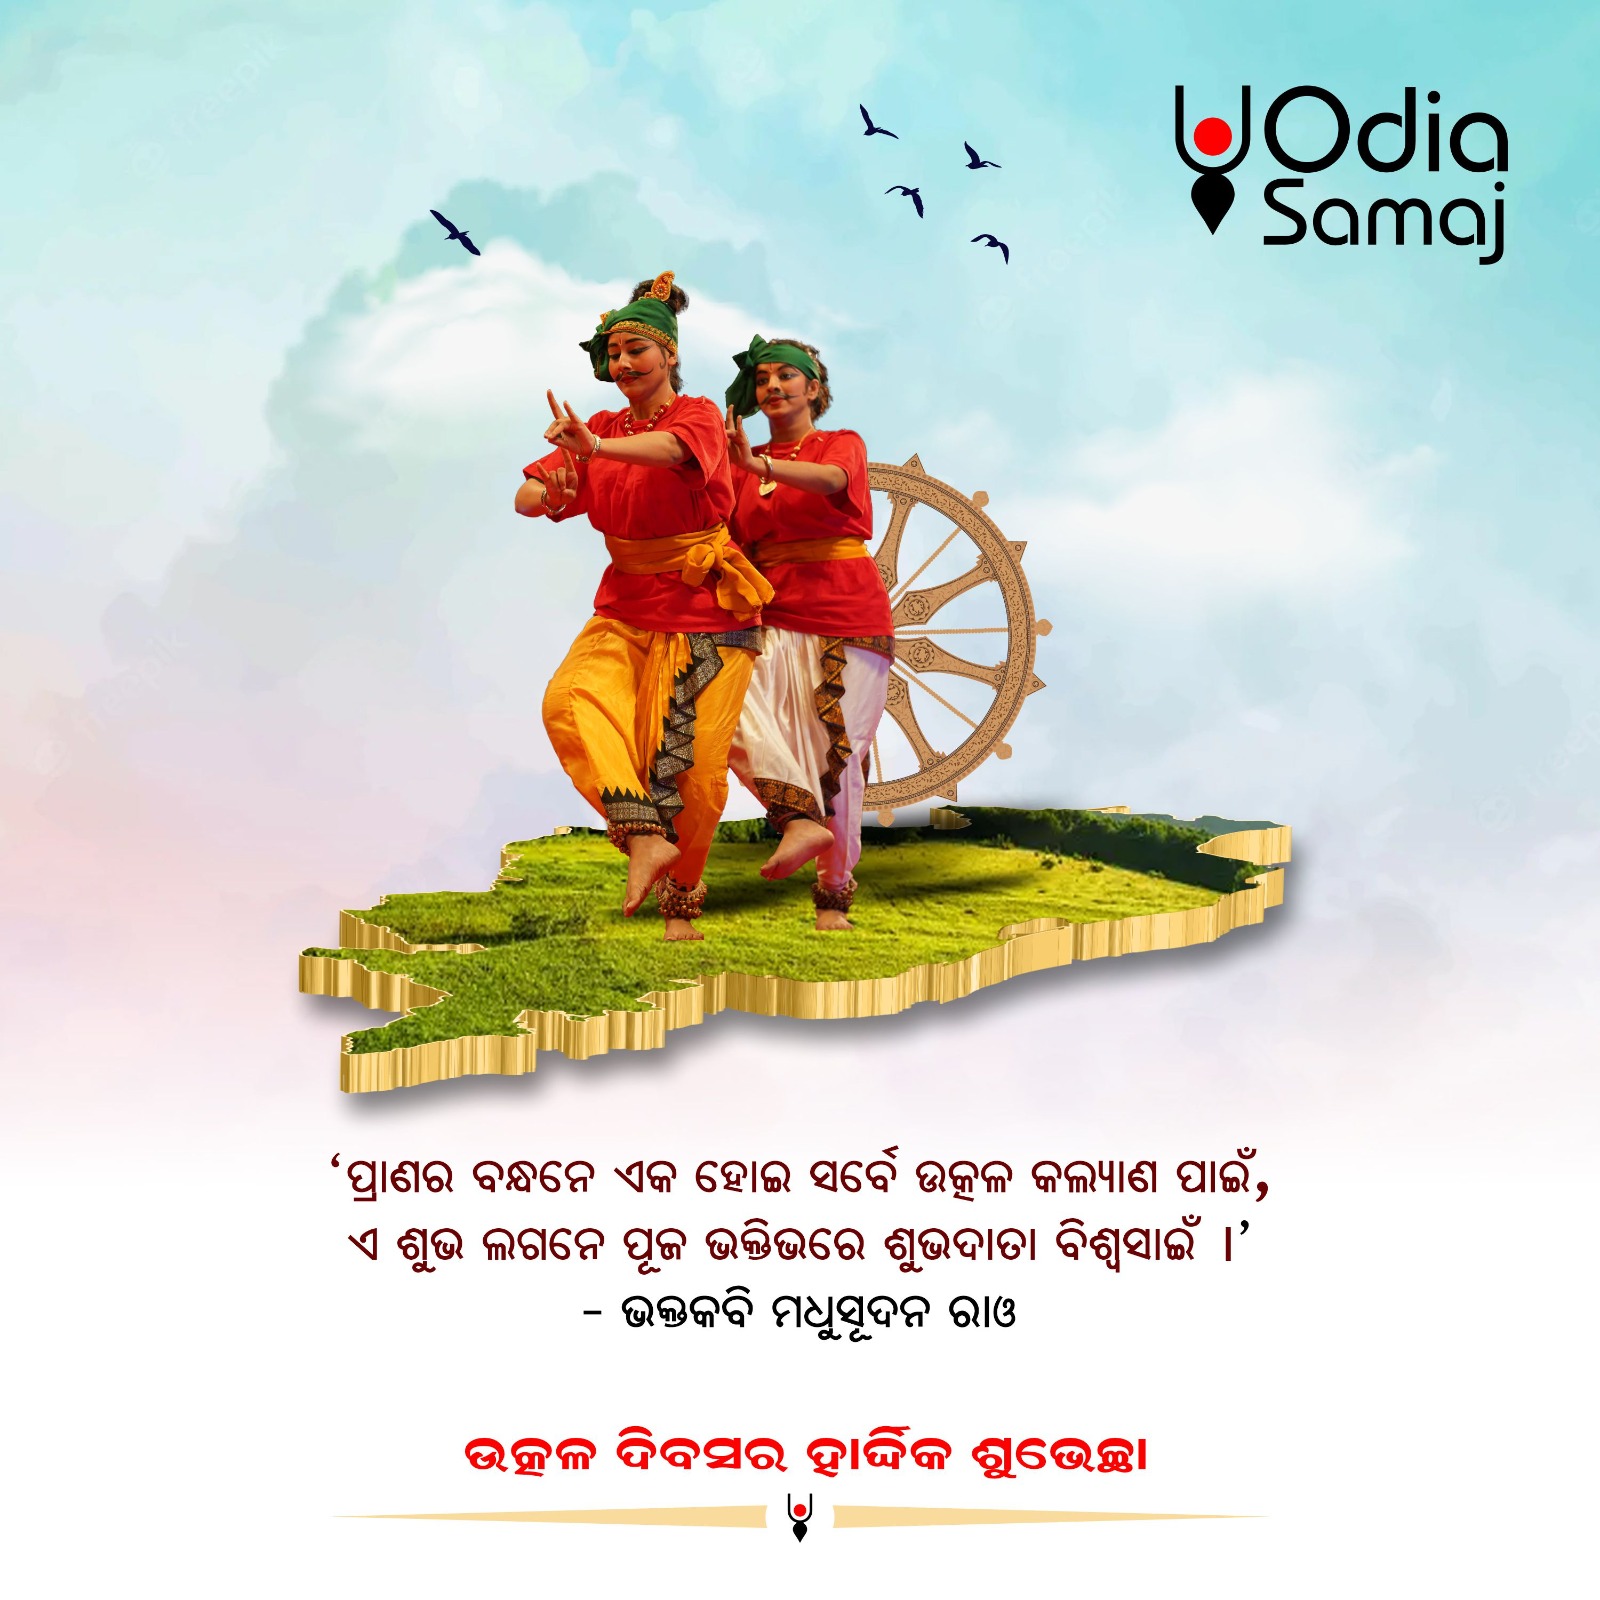 Odisha is celebrating Utkal Divas today with pride and unity.